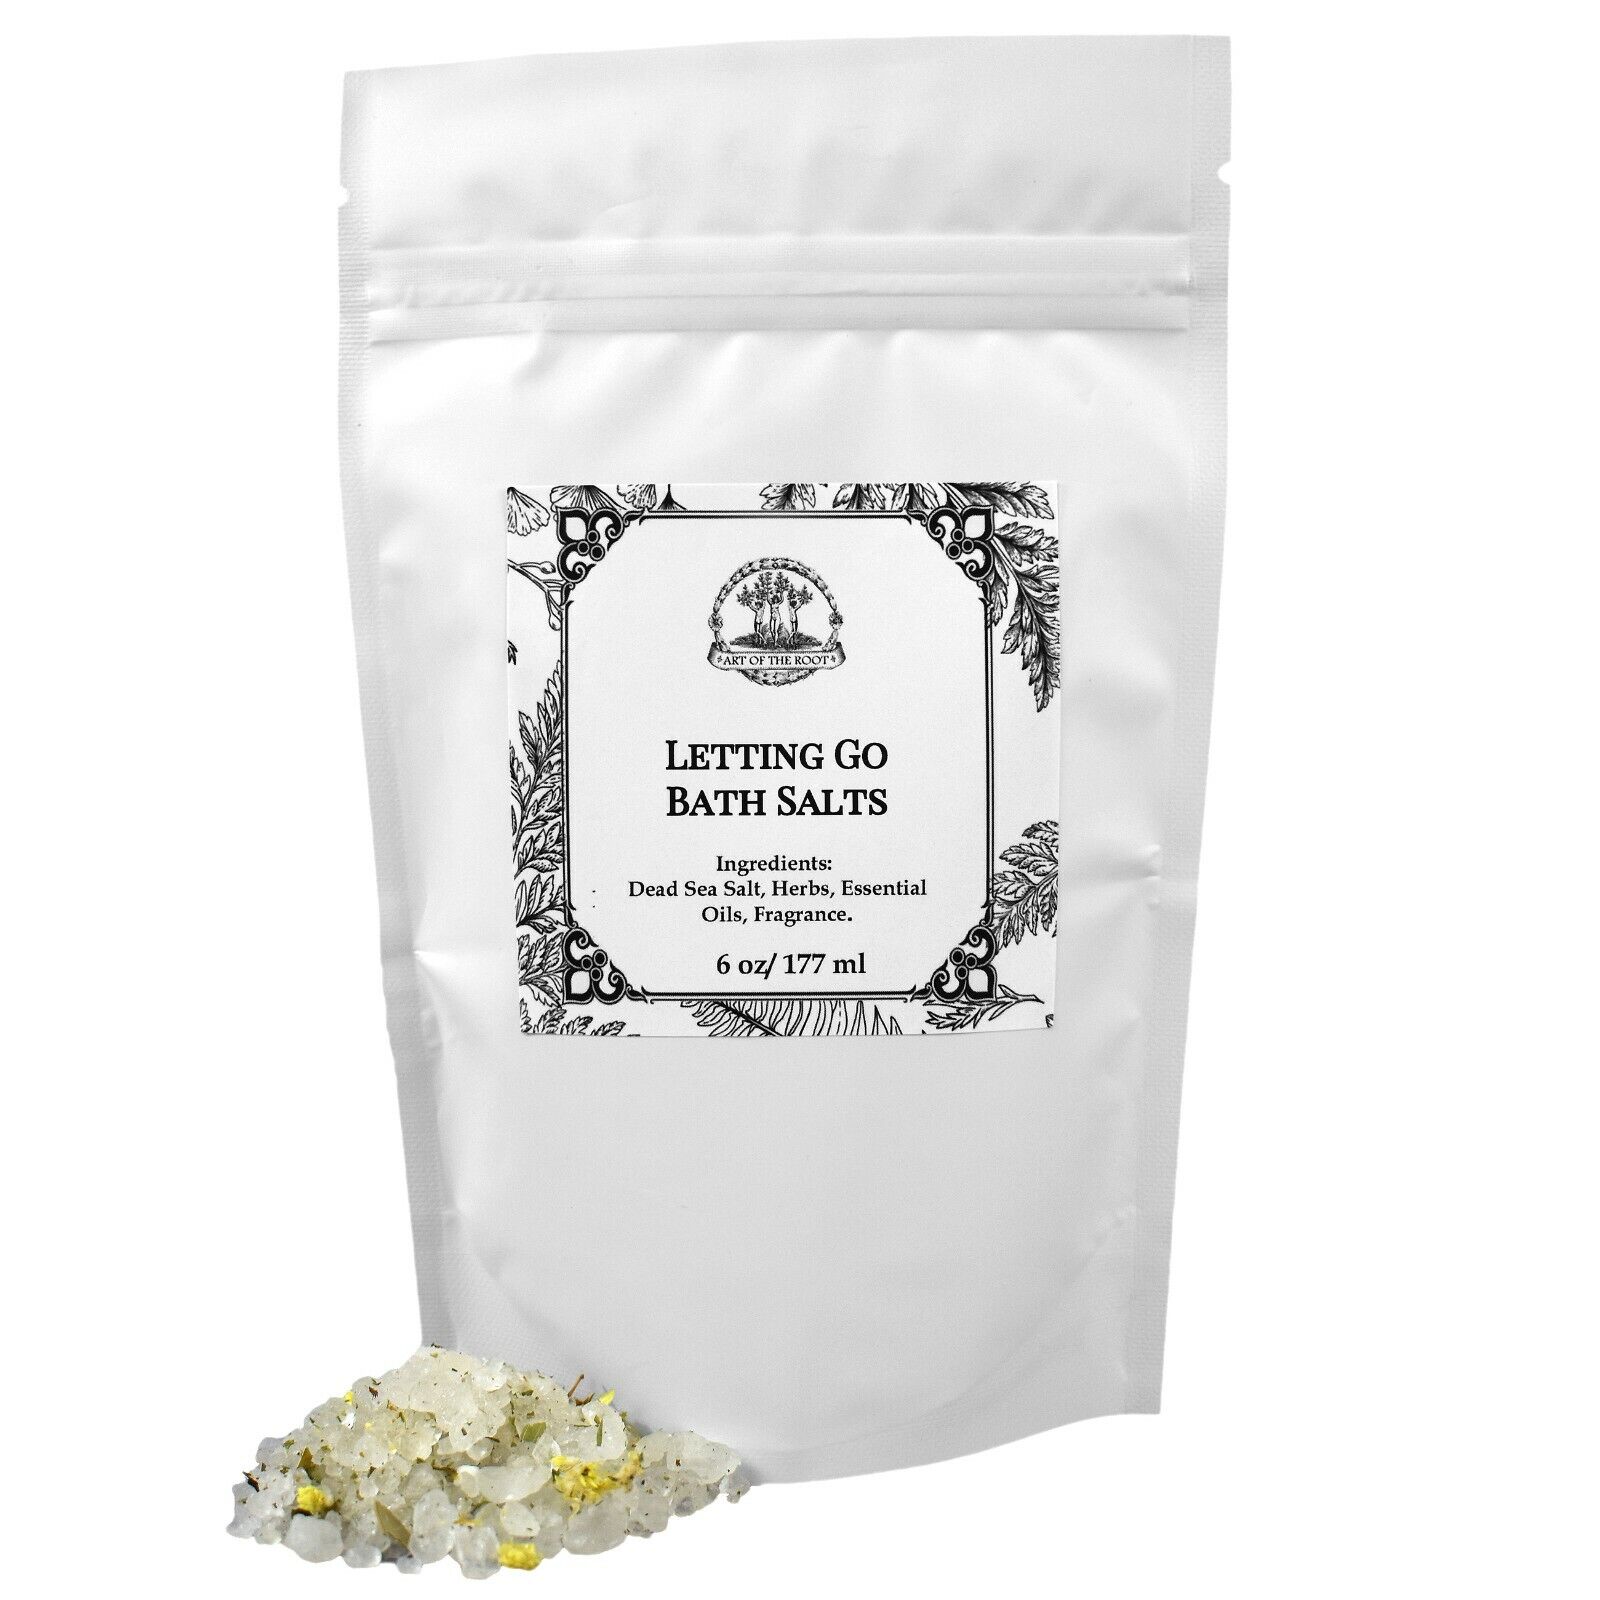 Letting Go Bath Salts Grief Shame Relationships Anger Trauma Wiccan Pagan Hoodoo